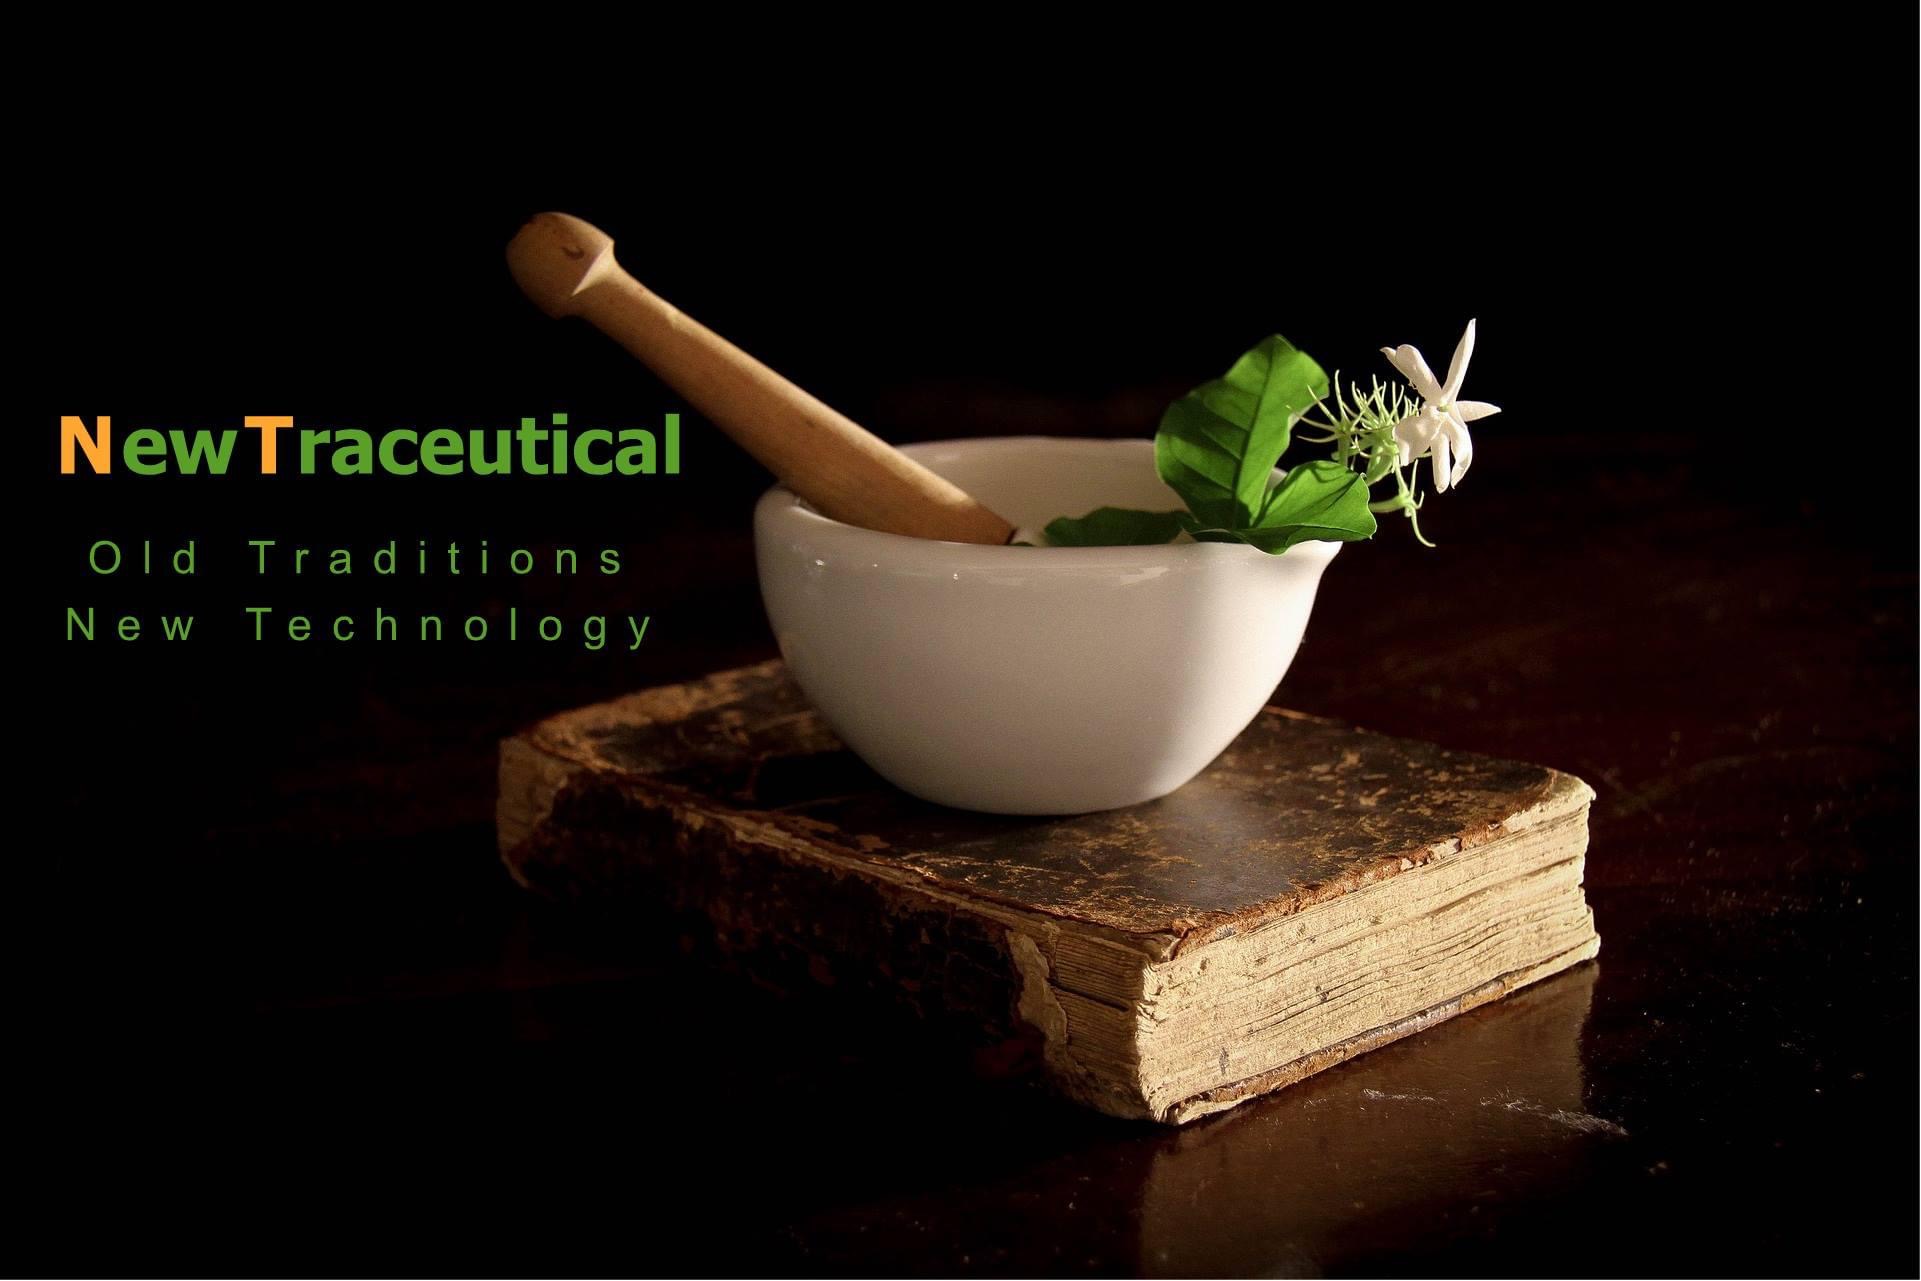 Newtraceutical - Ancient Traditions New Technology